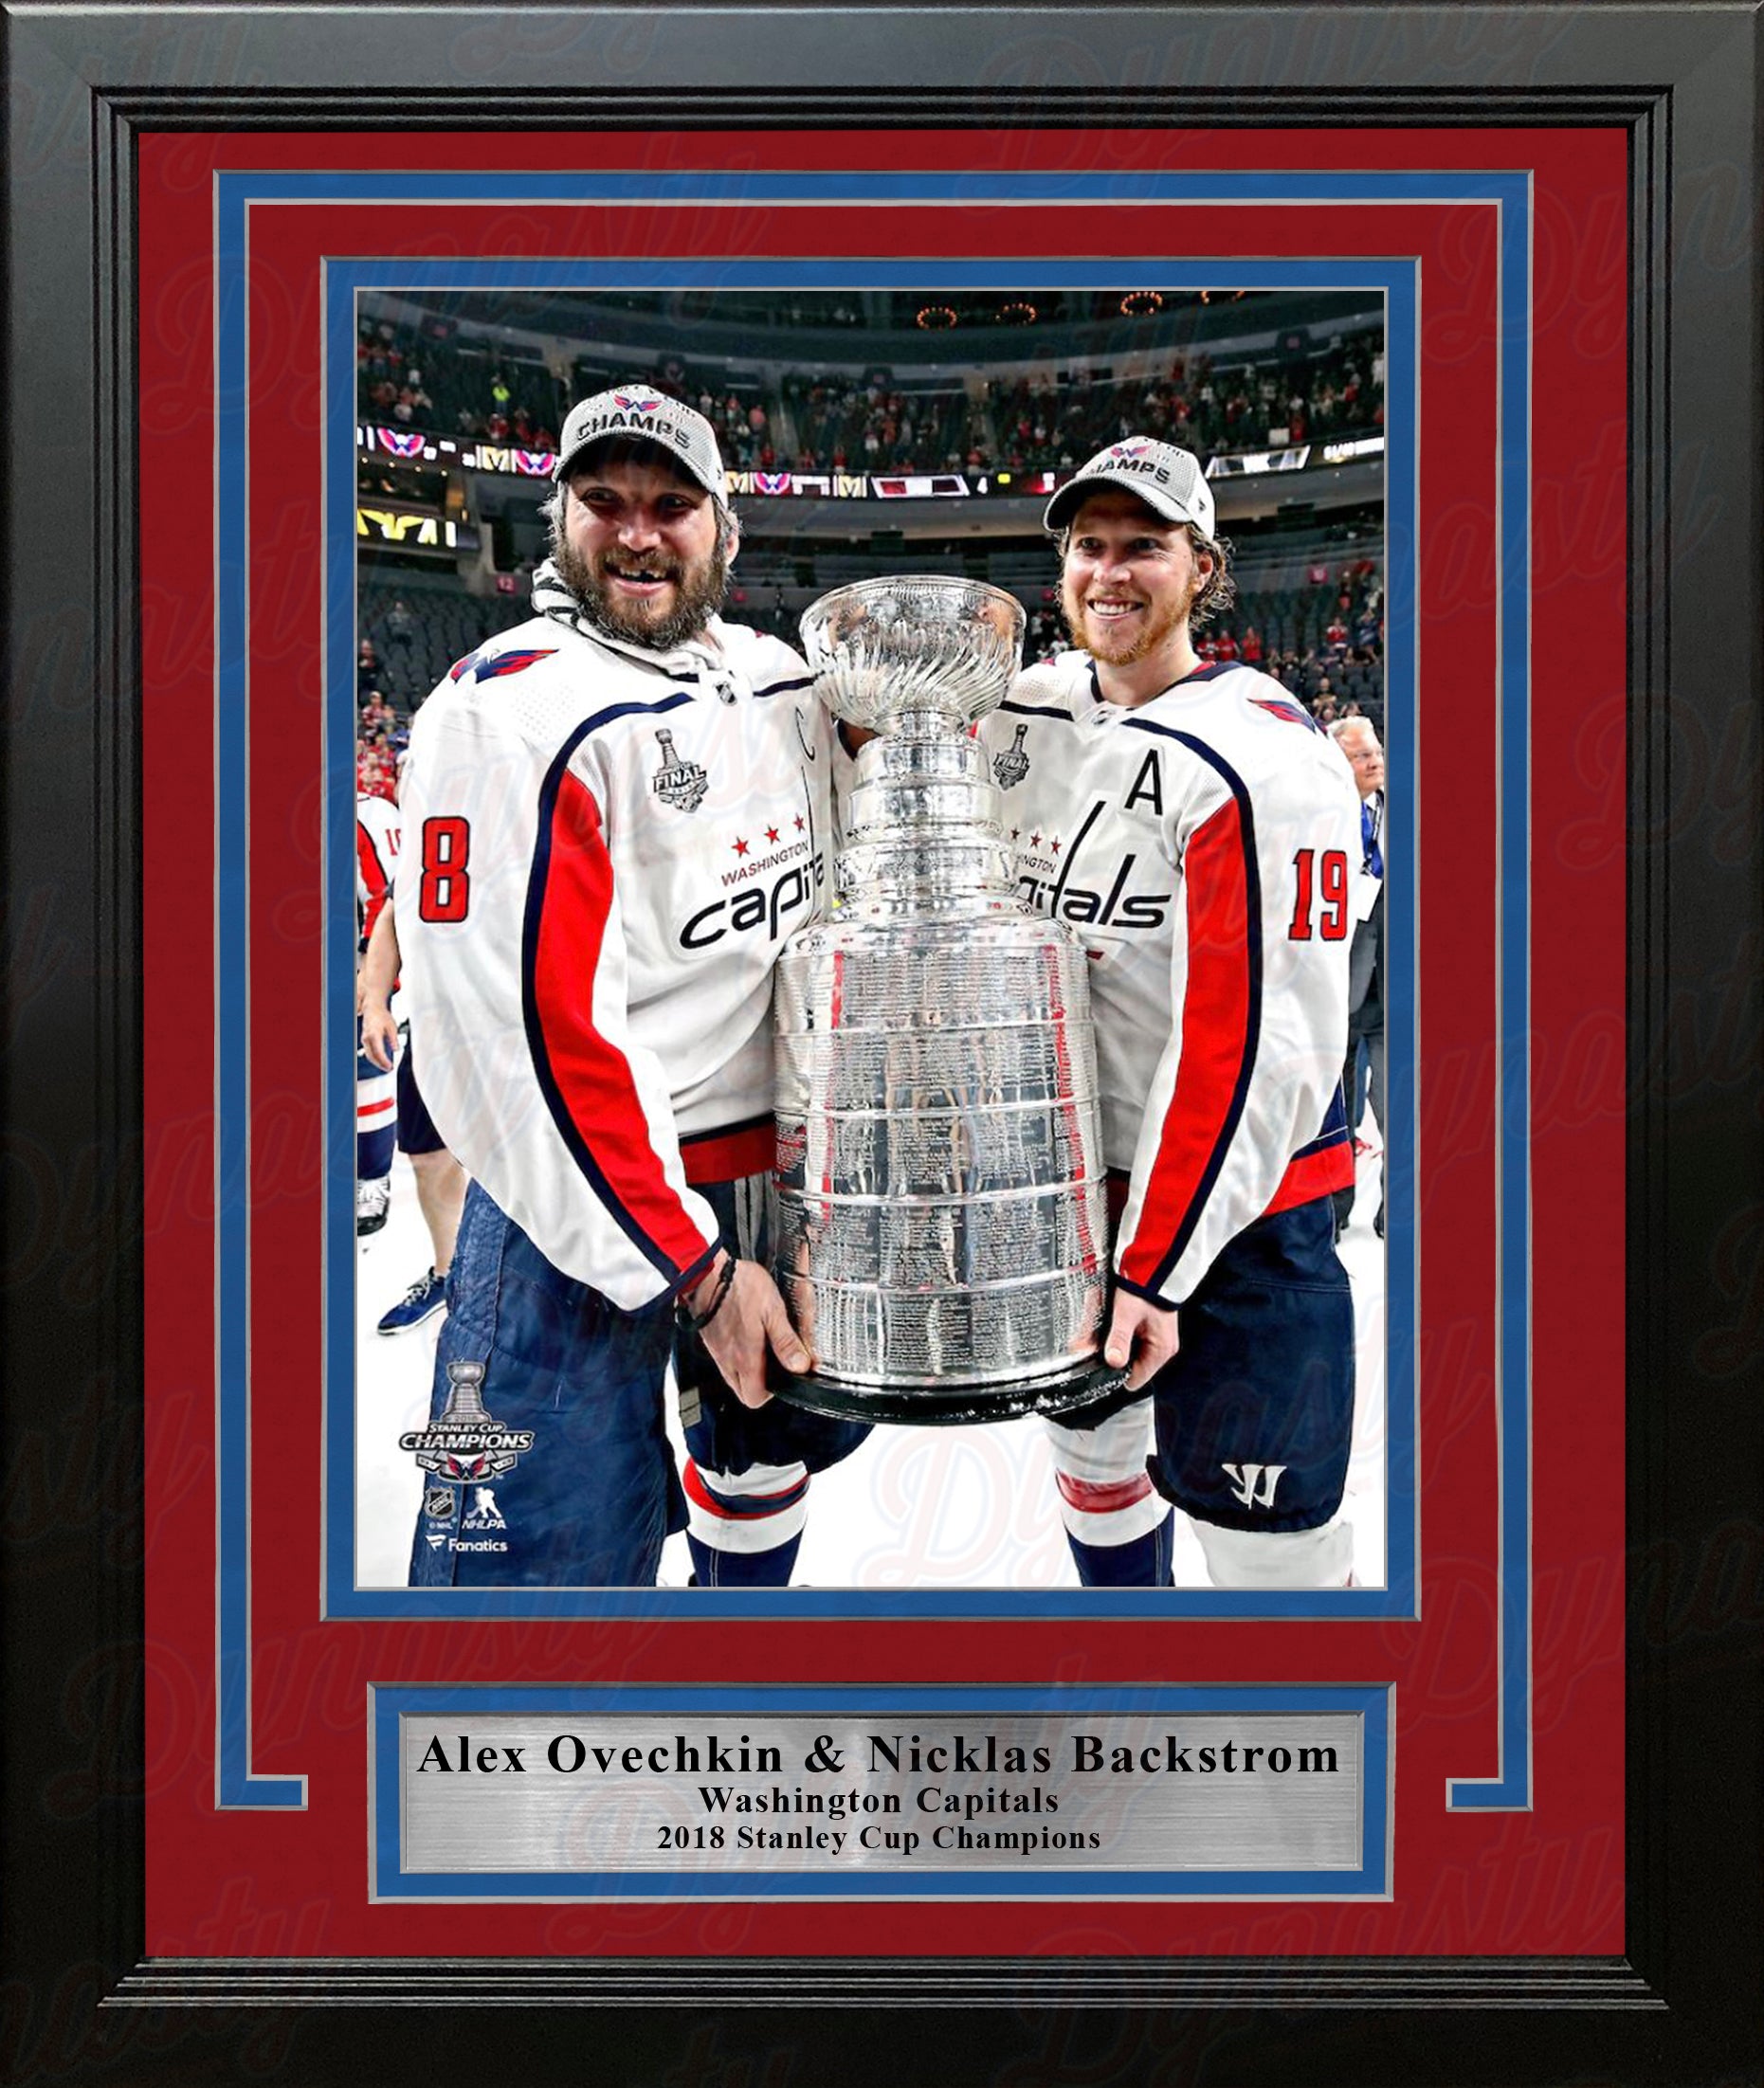 Alex Ovechkin Washington Capitals Framed 10 x 30 GR8 Chase Panoramic with A Piece of Game-Used Net - Limited Edition 888